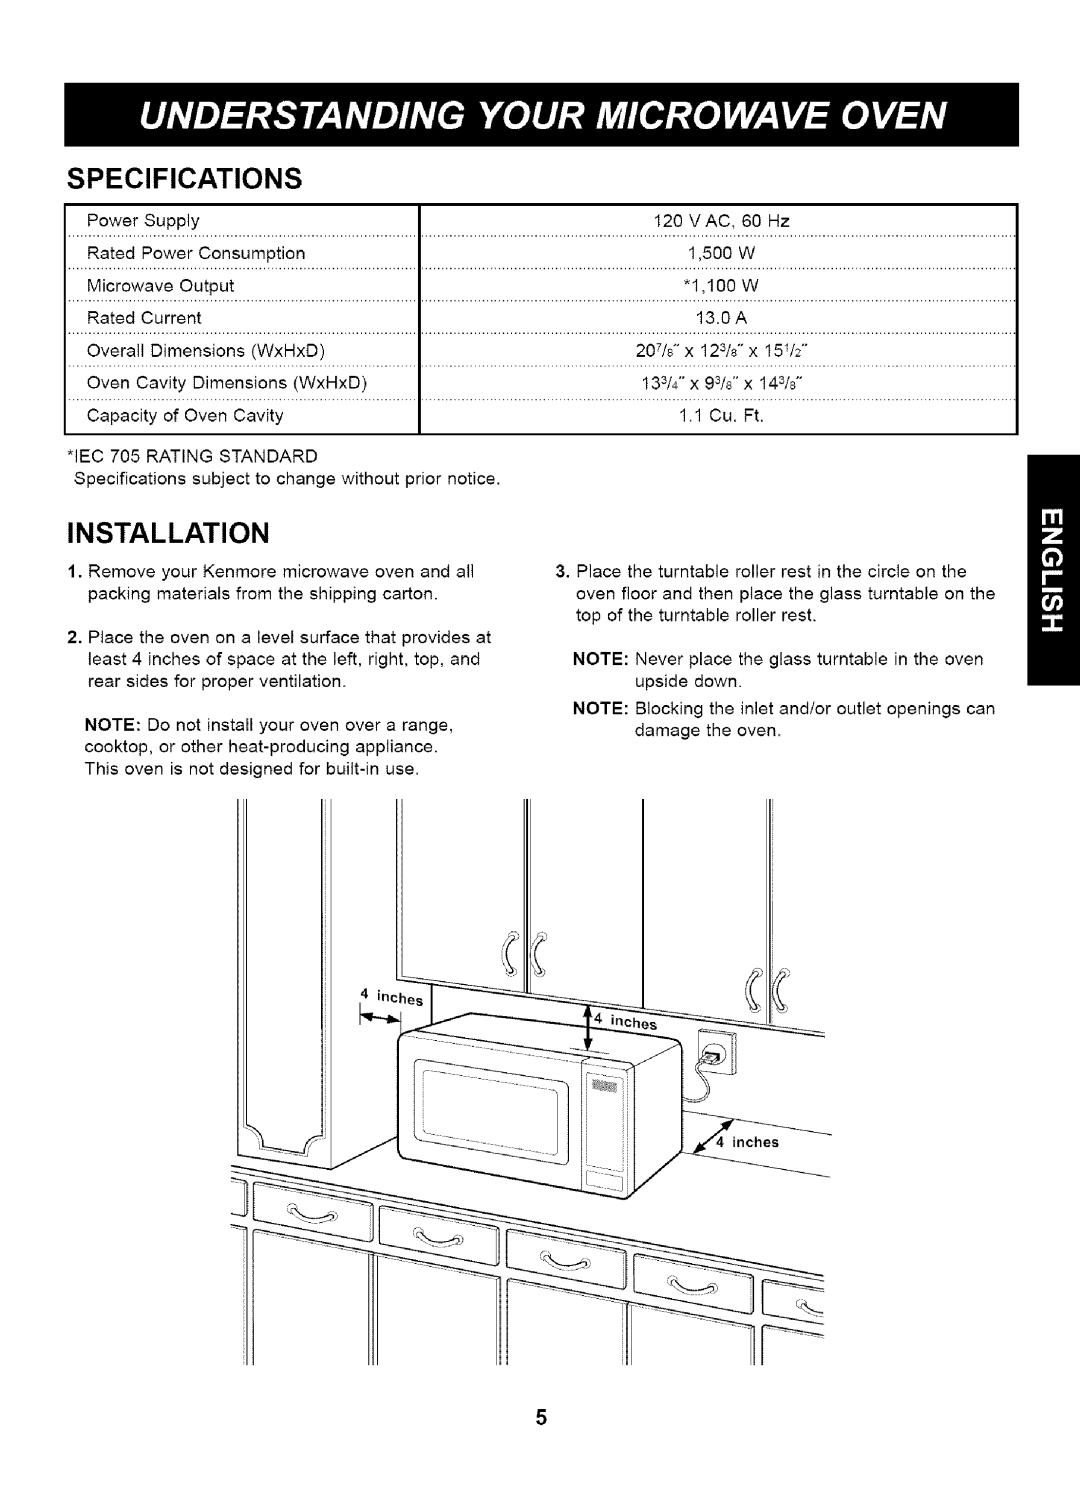 Kenmore 721.61283 manual Specifications, Installation, 1,100 W 